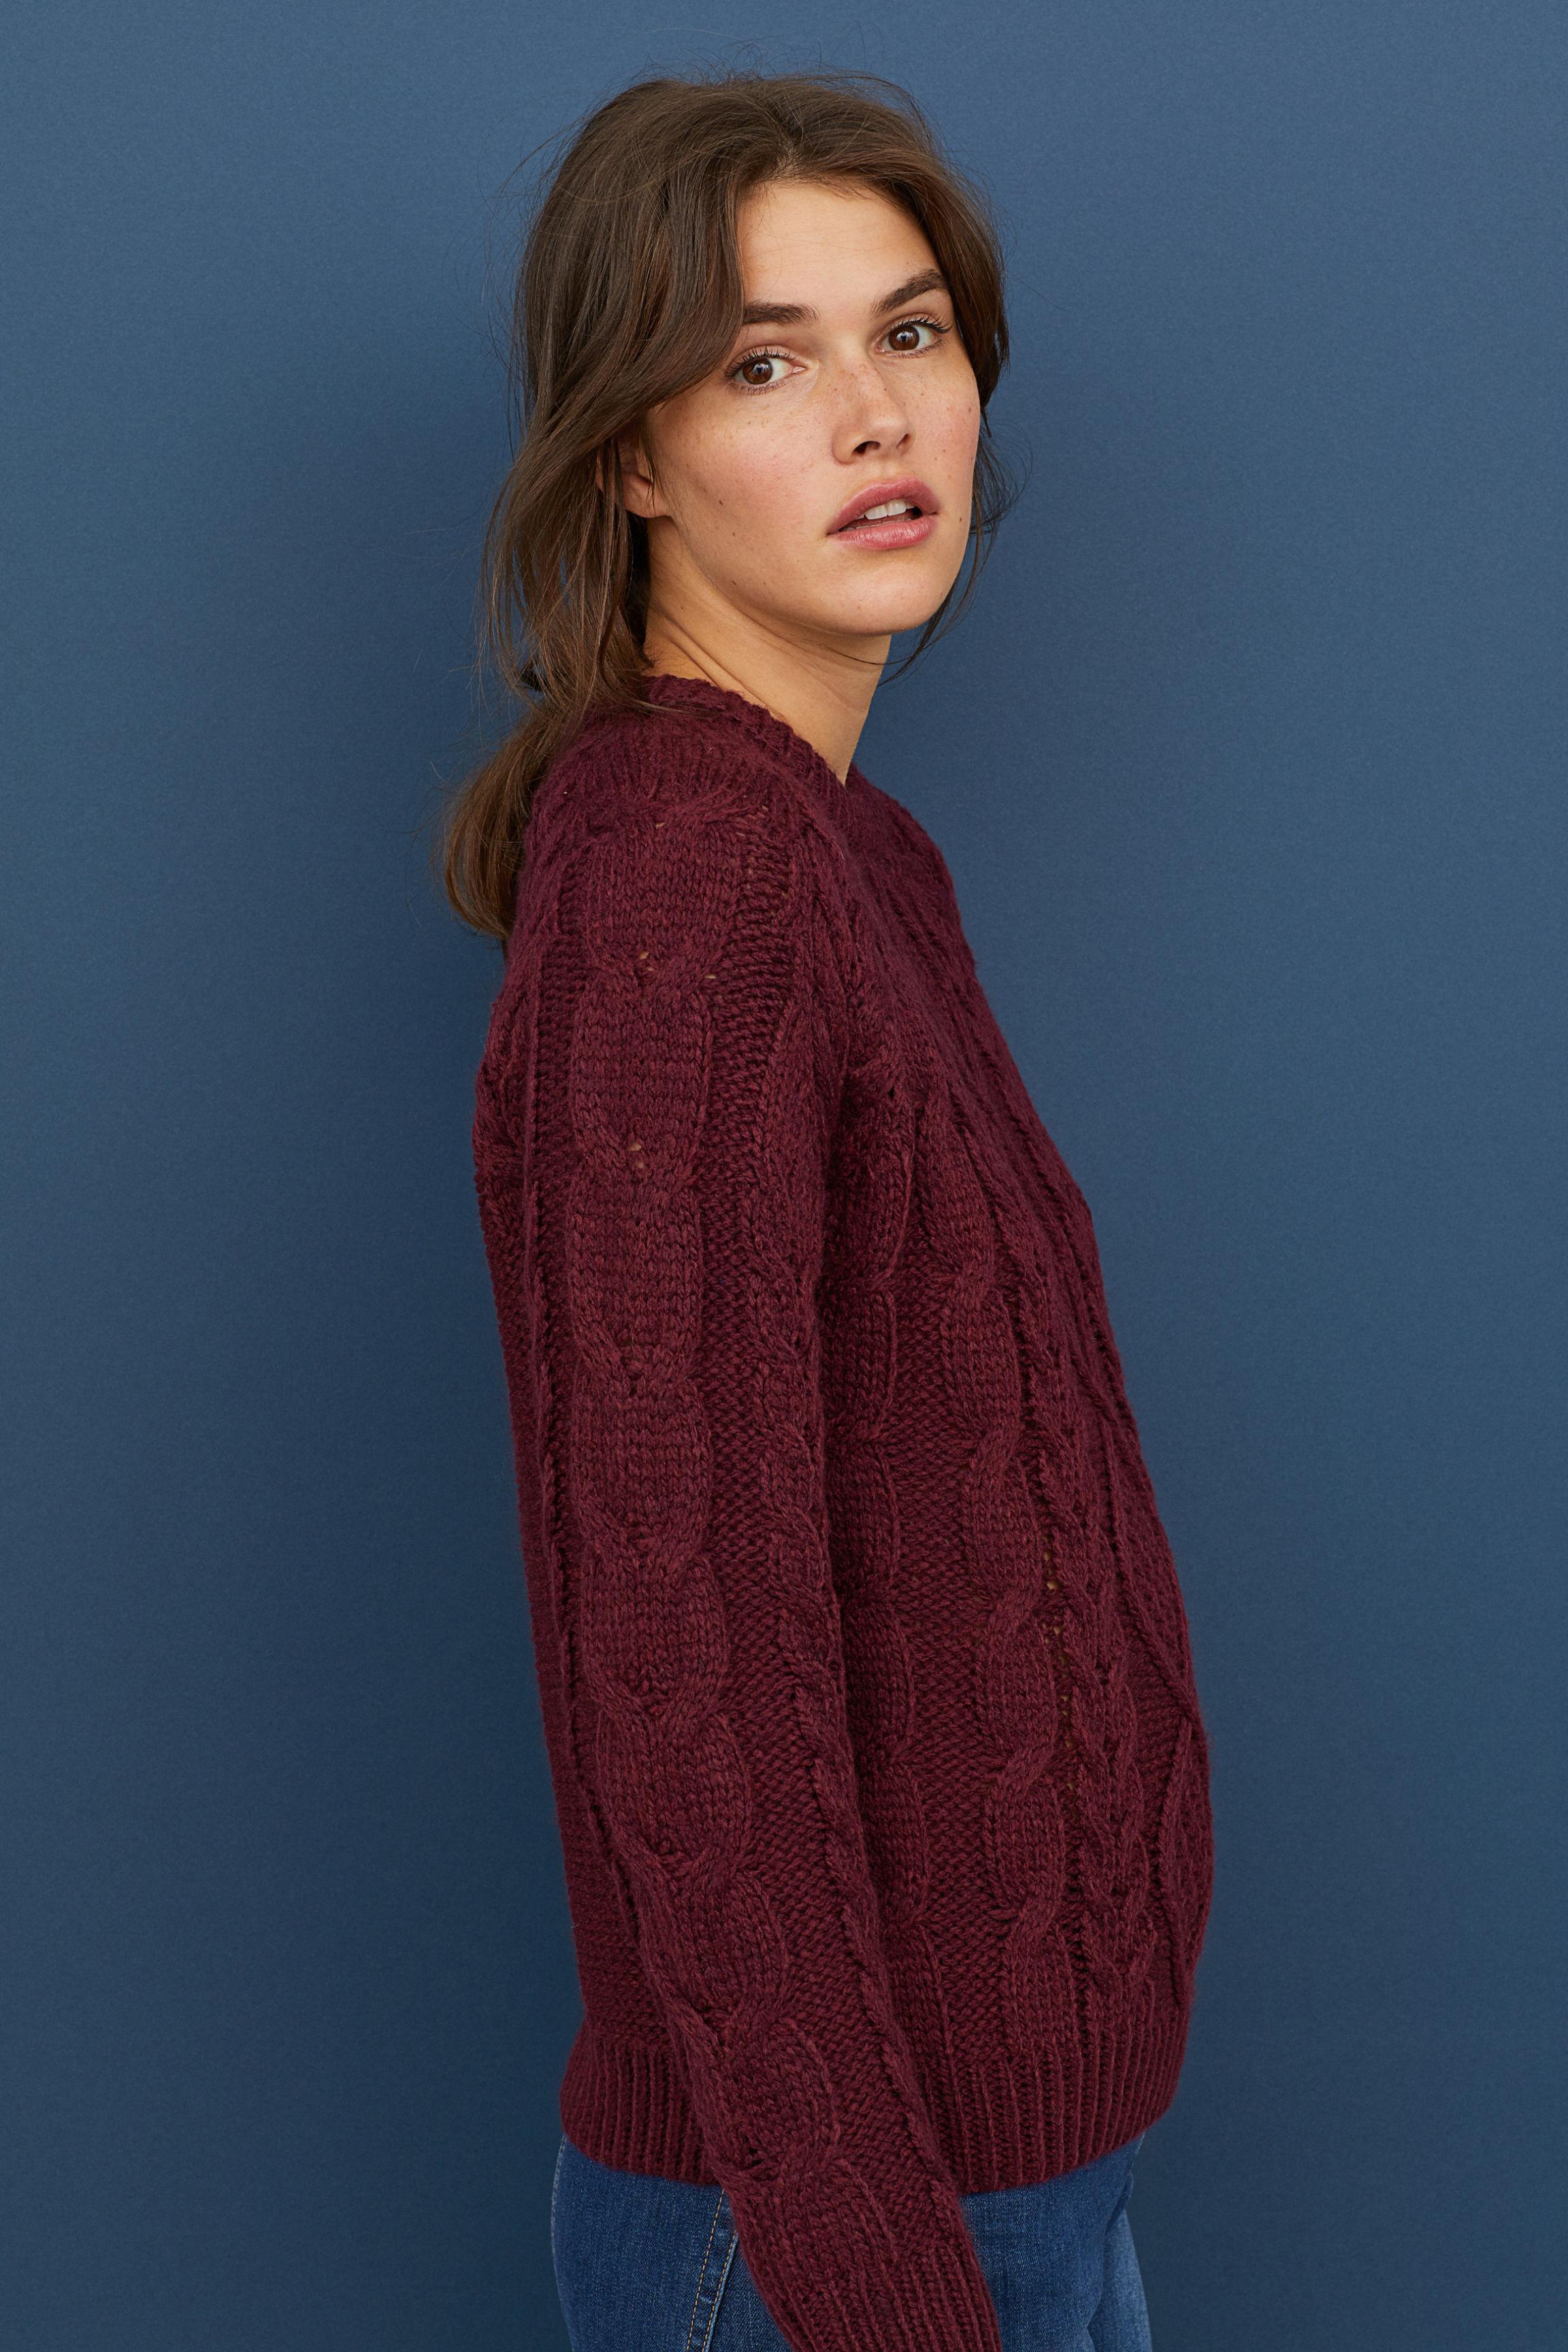 H&M Synthetic Cable-knit Sweater in Burgundy (Red) - Lyst